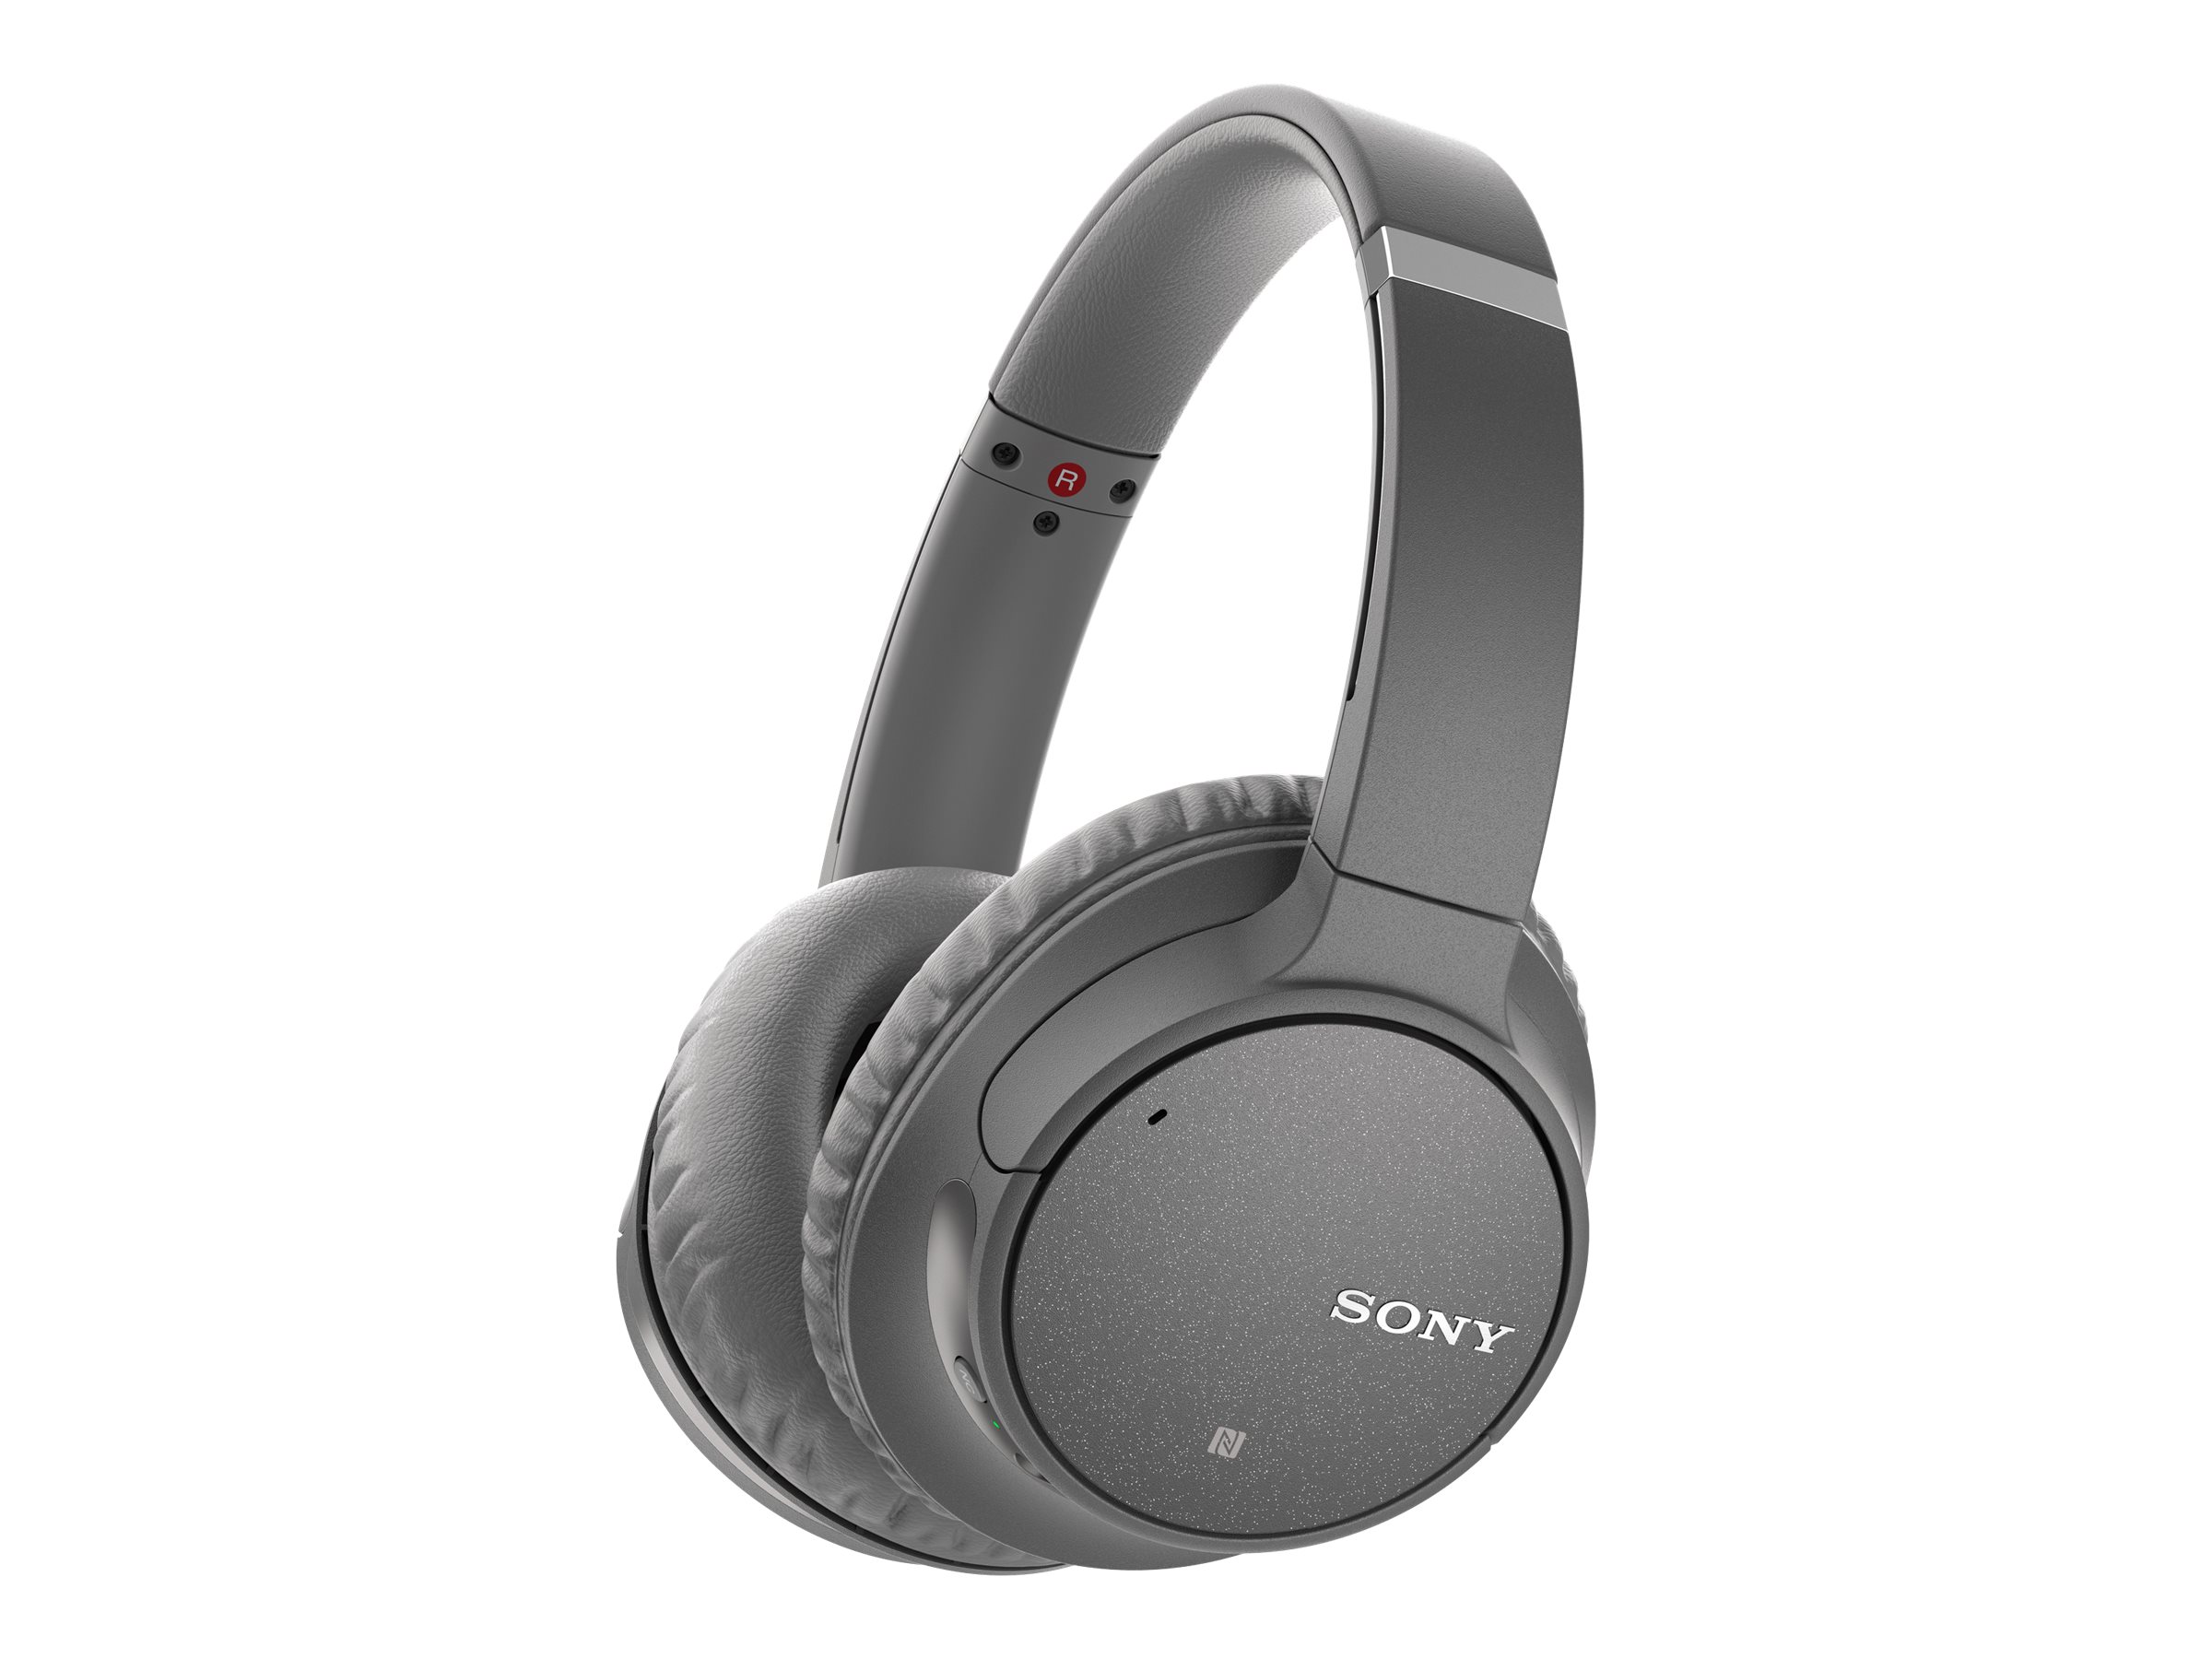 Sony WH-CH700N - Headphones with mic | www.shi.com